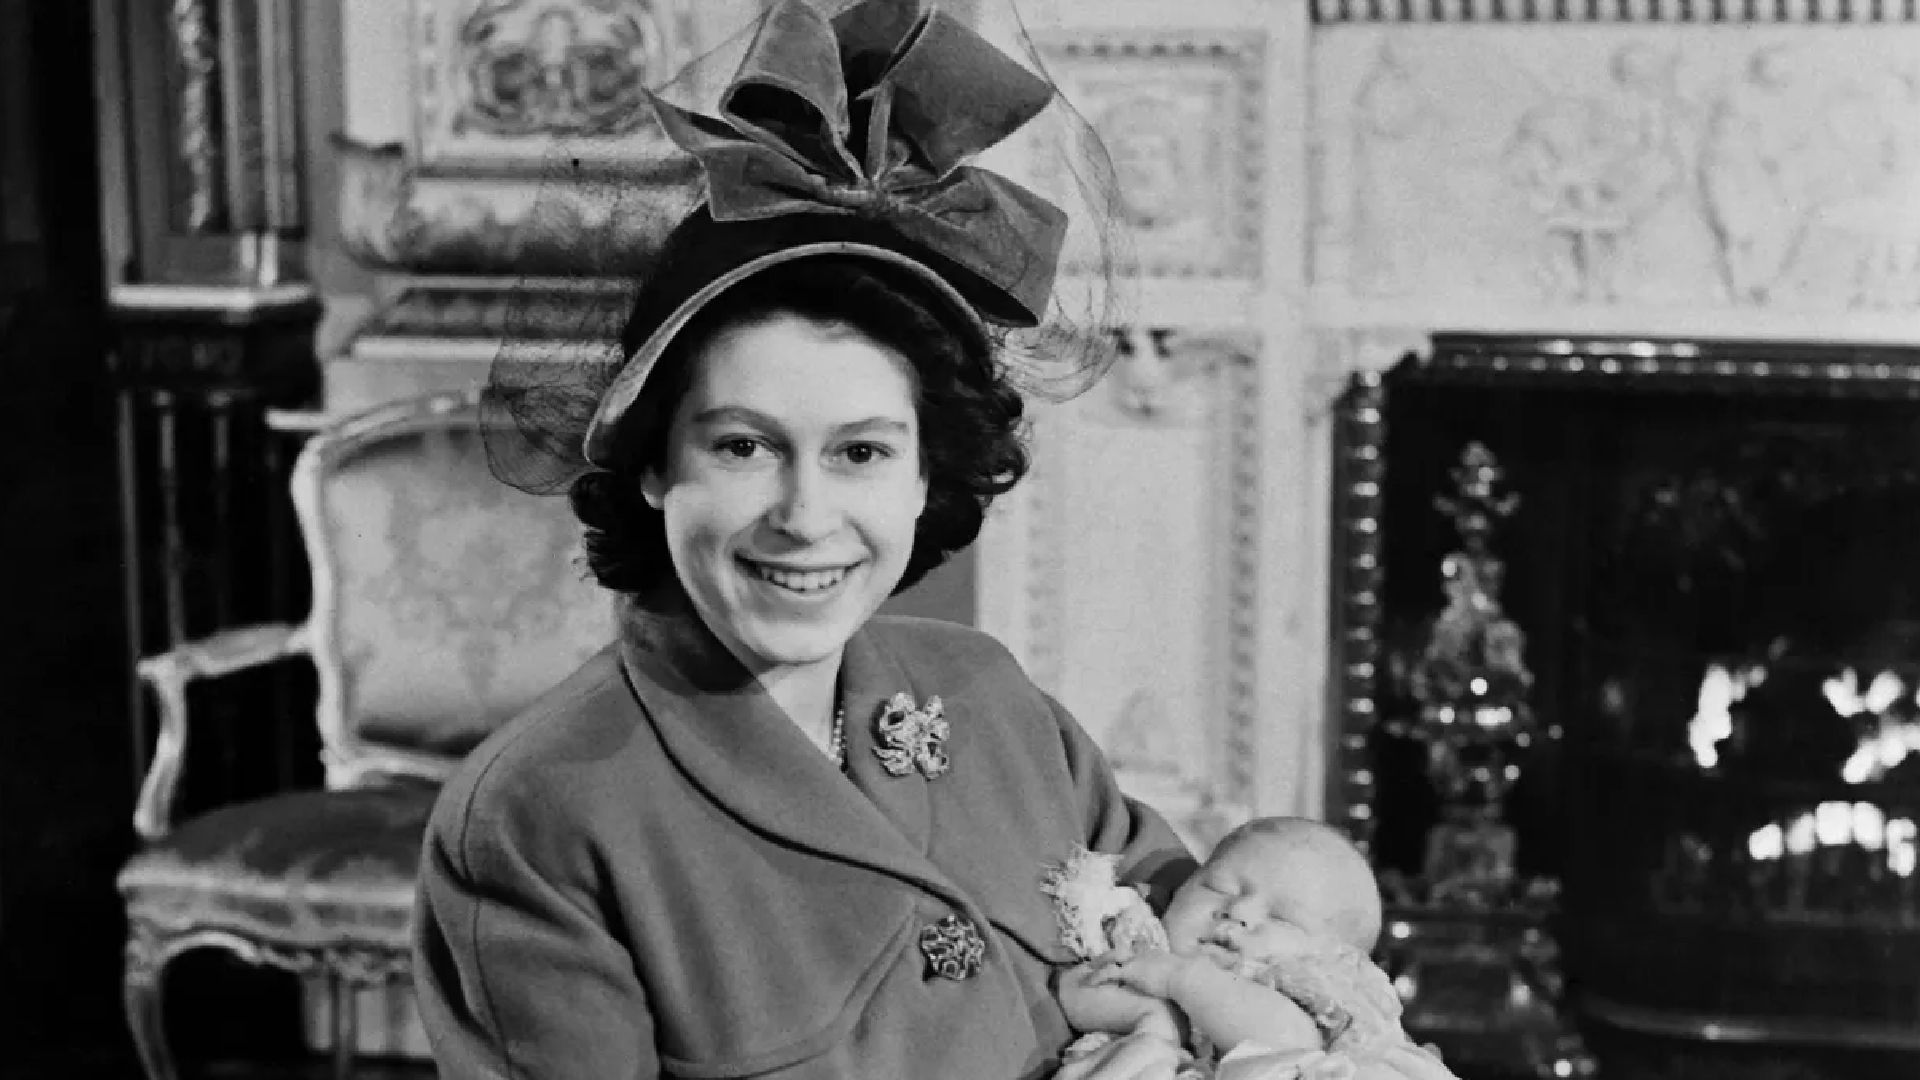 <p>                     Yet another moment that changed Queen Elizabeth’s life forever was the birth of her and Prince Philip's first child on 14th November 1948. The now-King Charles arrived via Caesarean section at Buckingham Palace and became first in the royal line of succession. It's understood that the King's Troop Royal Artillery fired a 41-gun salute and the bells of Westminster Abbey rang in celebration of King Charles' birth.                   </p>